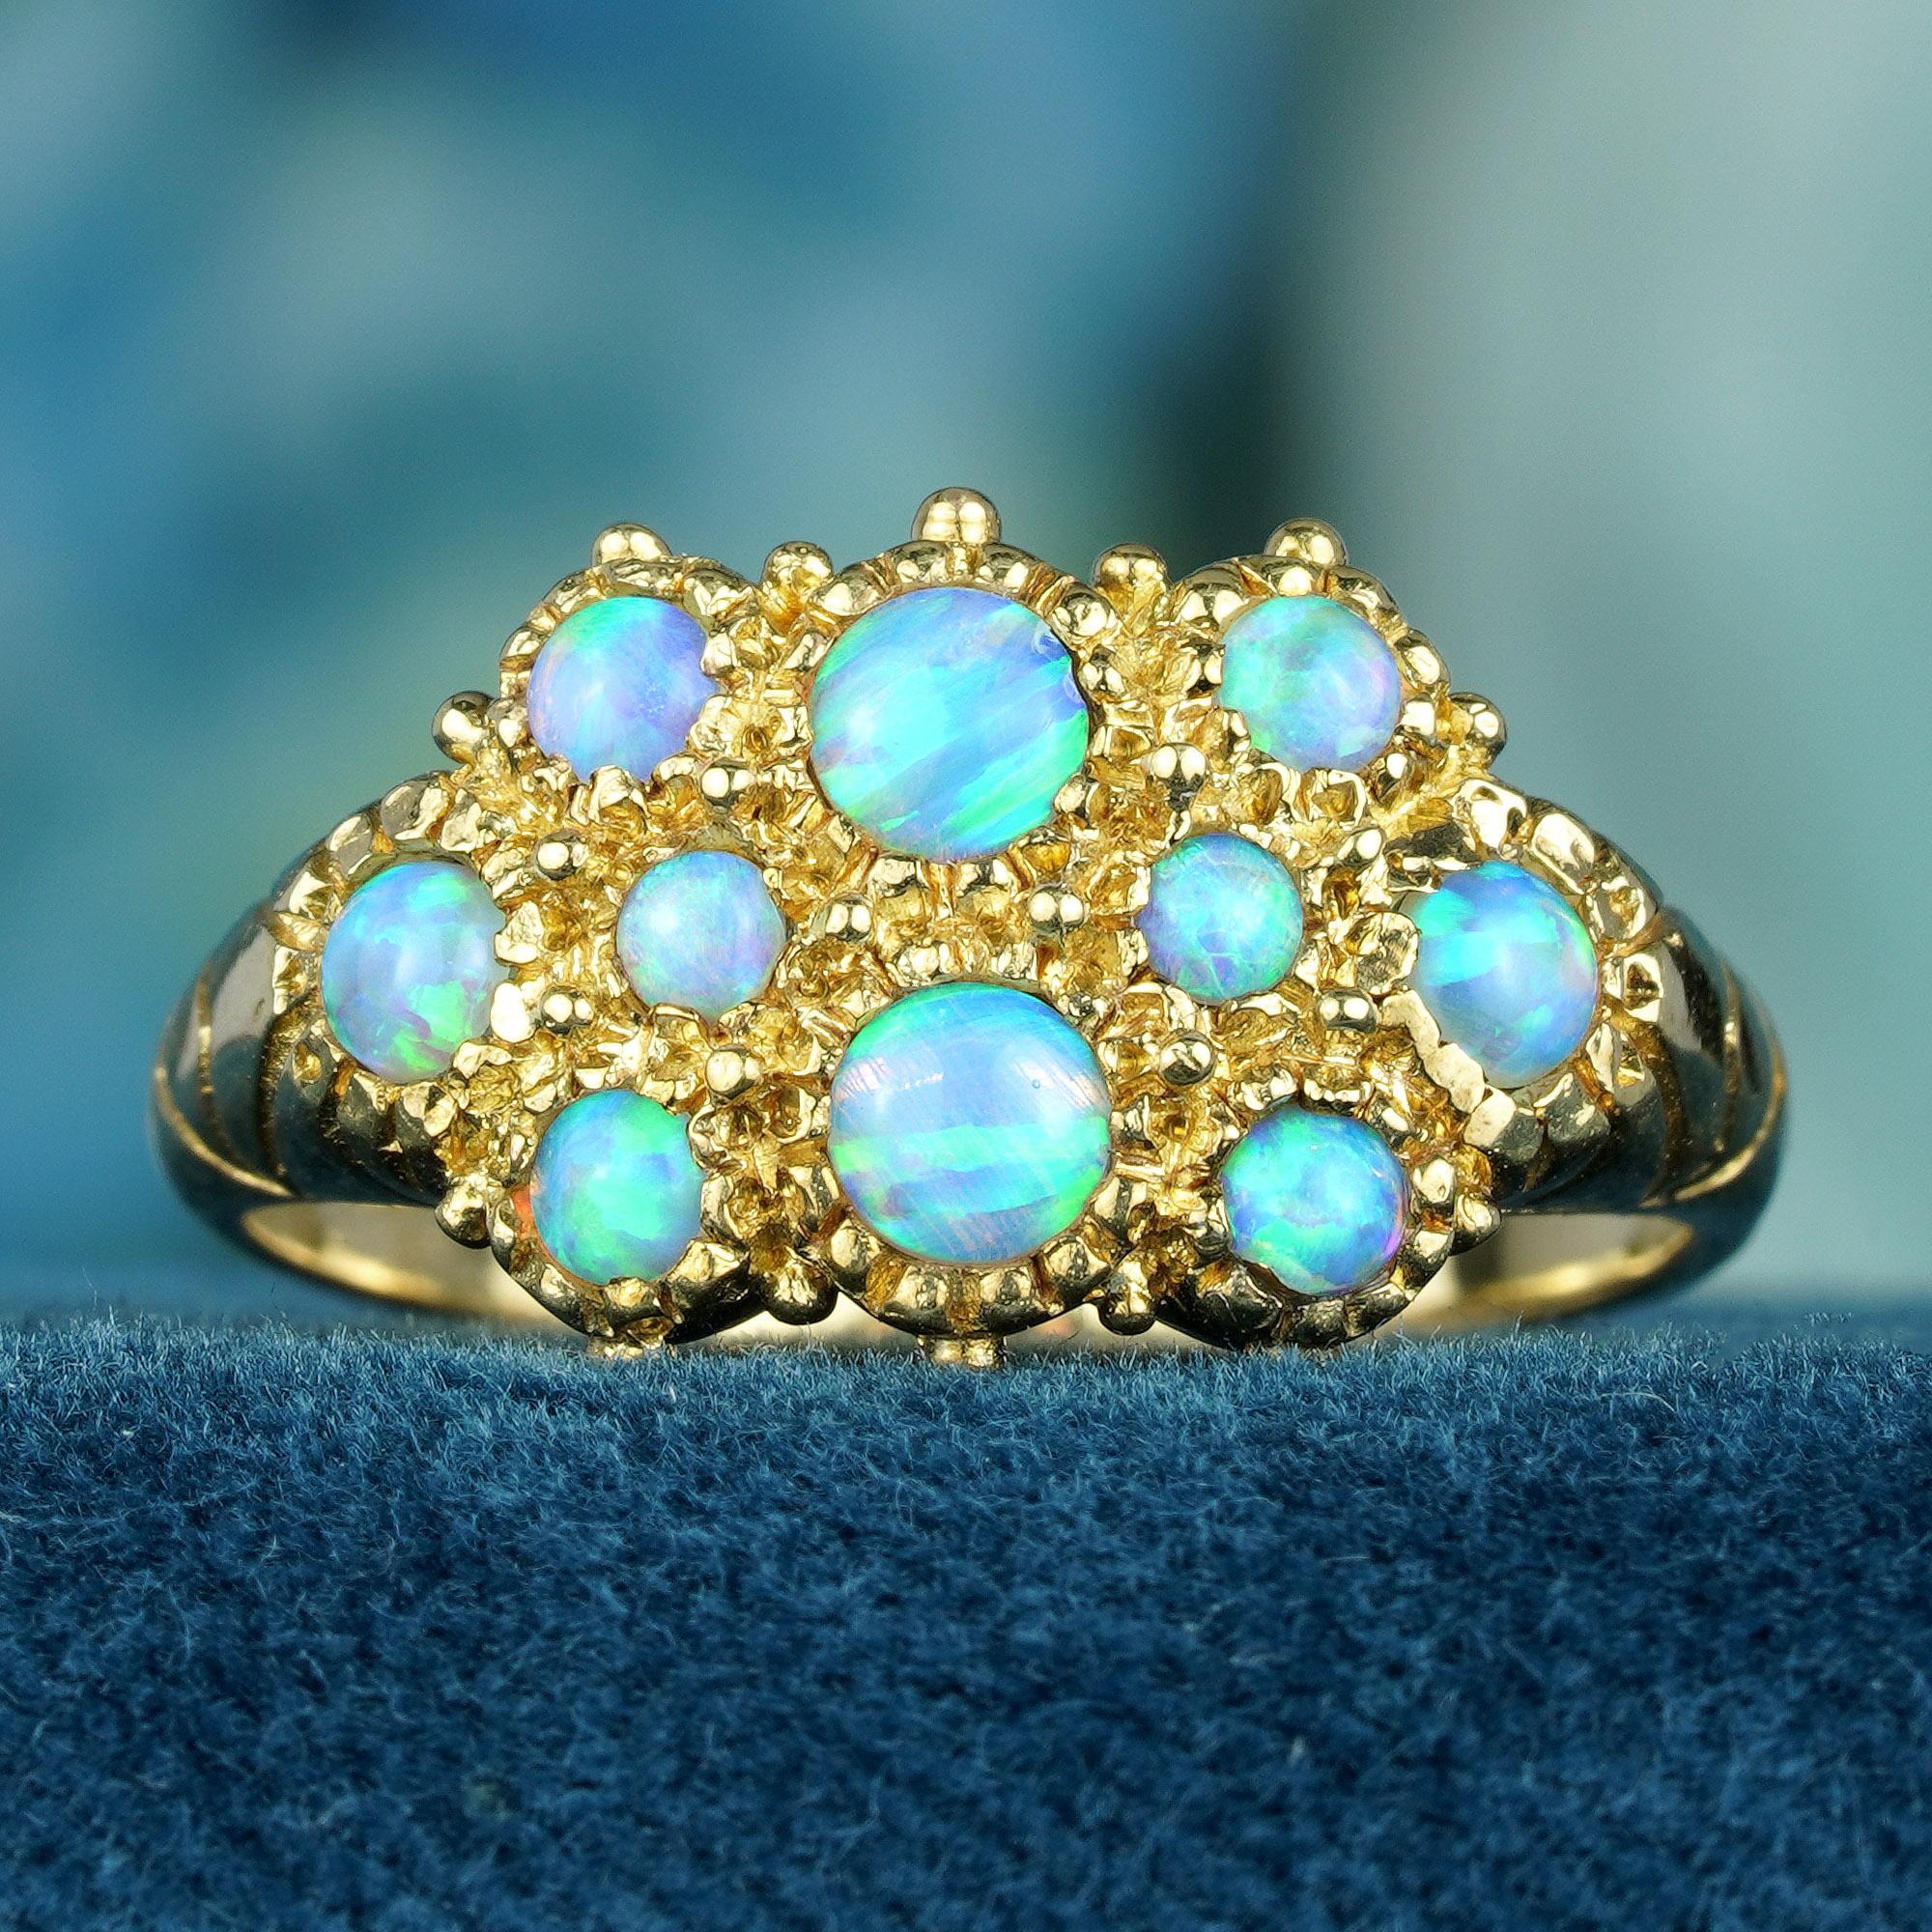 The ring showcases a cluster of natural opals set in solid yellow gold that curves gently upwards towards the milky white opal setting, creating a delicate and cool look. These round, white opals exhibit a variety of shades of milky white color,